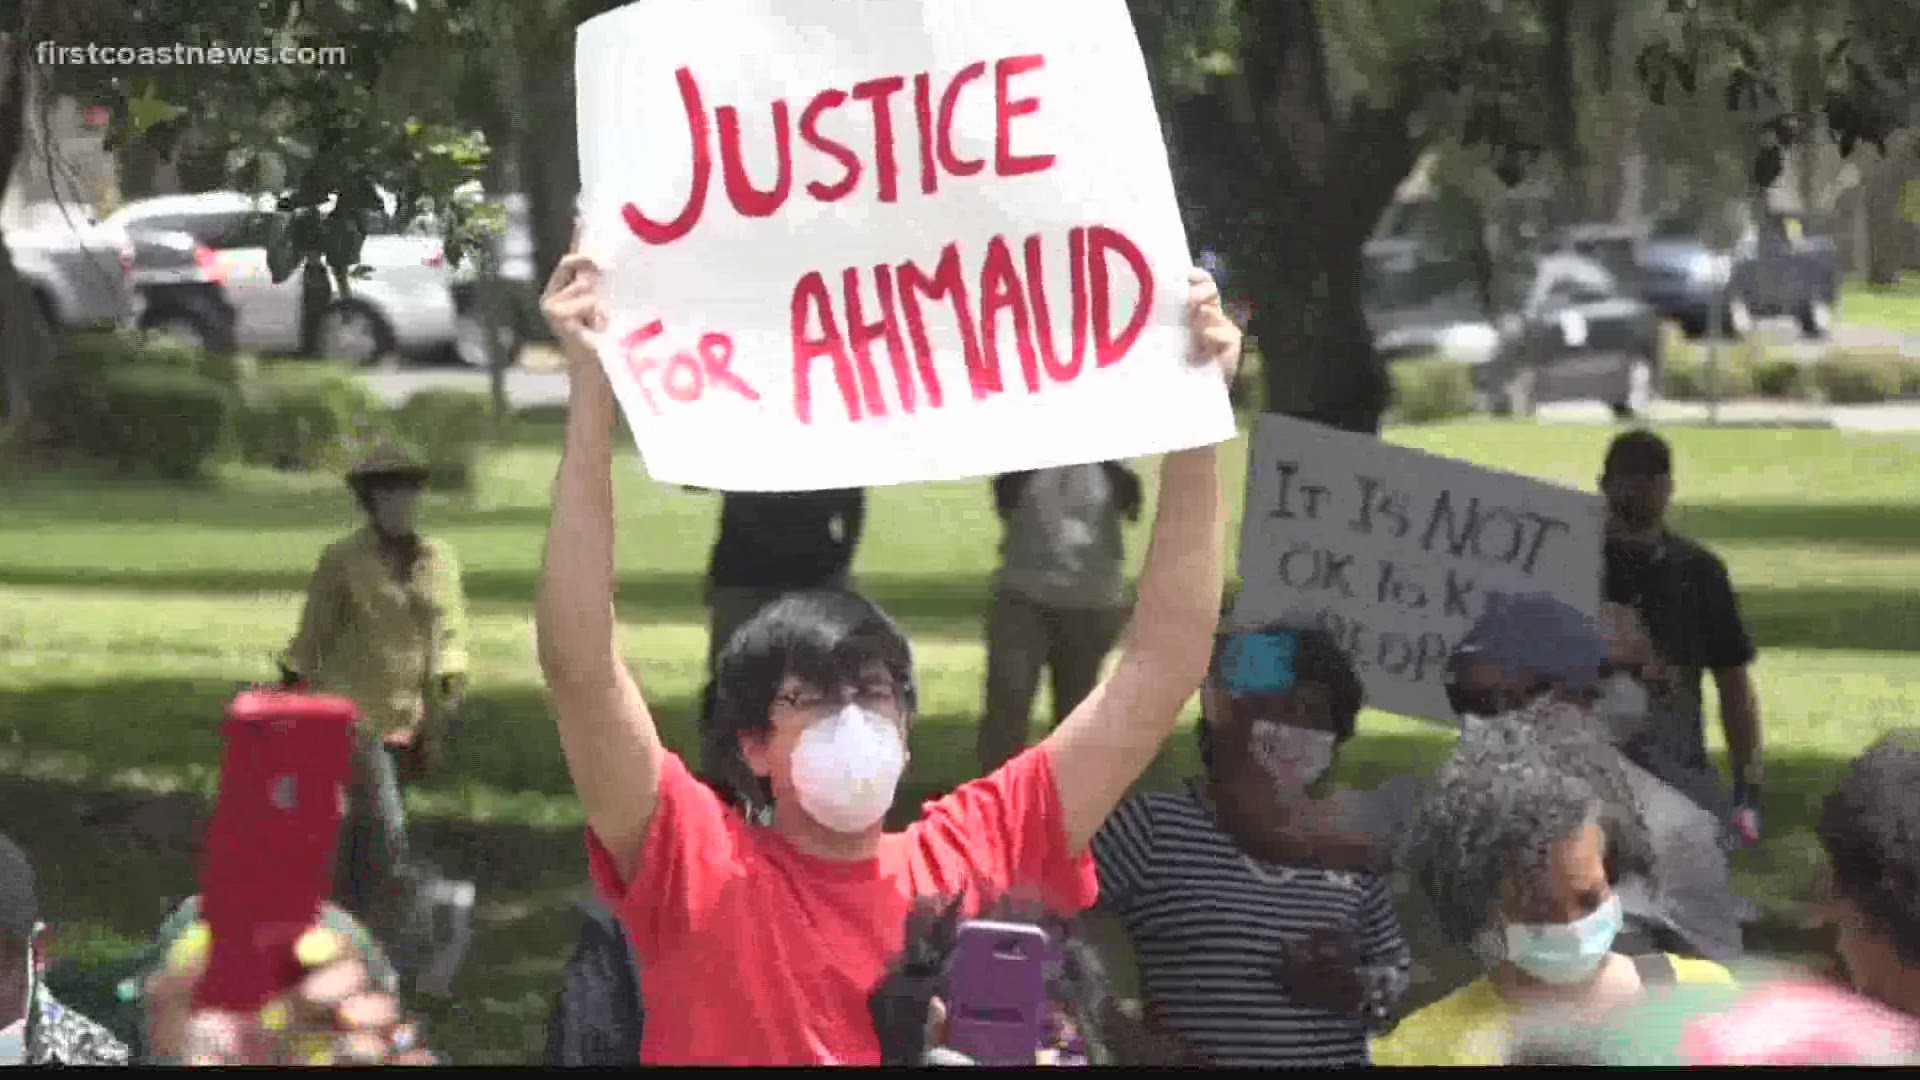 Hundreds of people marched through Brunswick Saturday demanding justice for Ahmaud Arbery. The march followed a rally organized by the ACLU of Georgia.